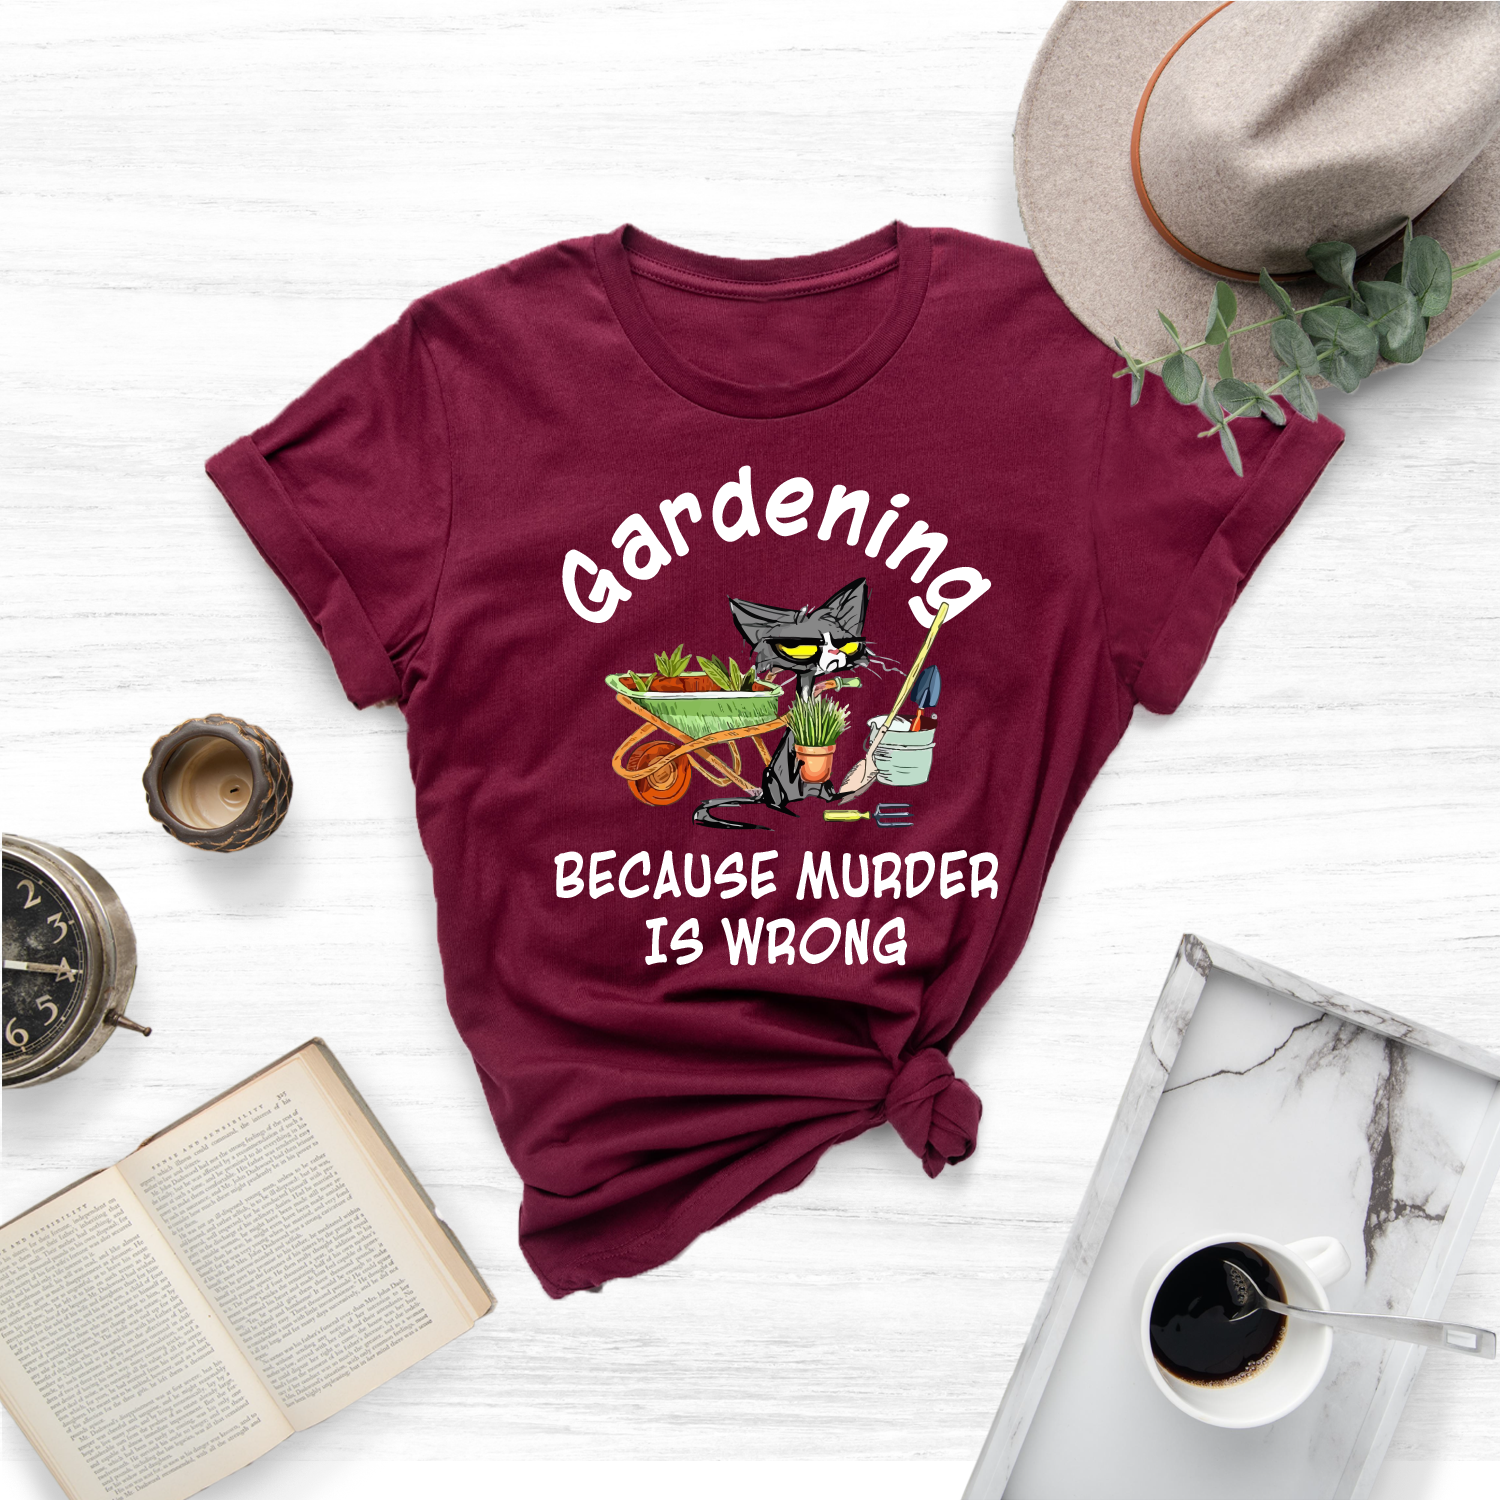 Unleash your inner green thumb and your witty side with our "Gardening Because Murder Is Wrong" T-shirt, the perfect way to express your love for plants and your distaste for violence.